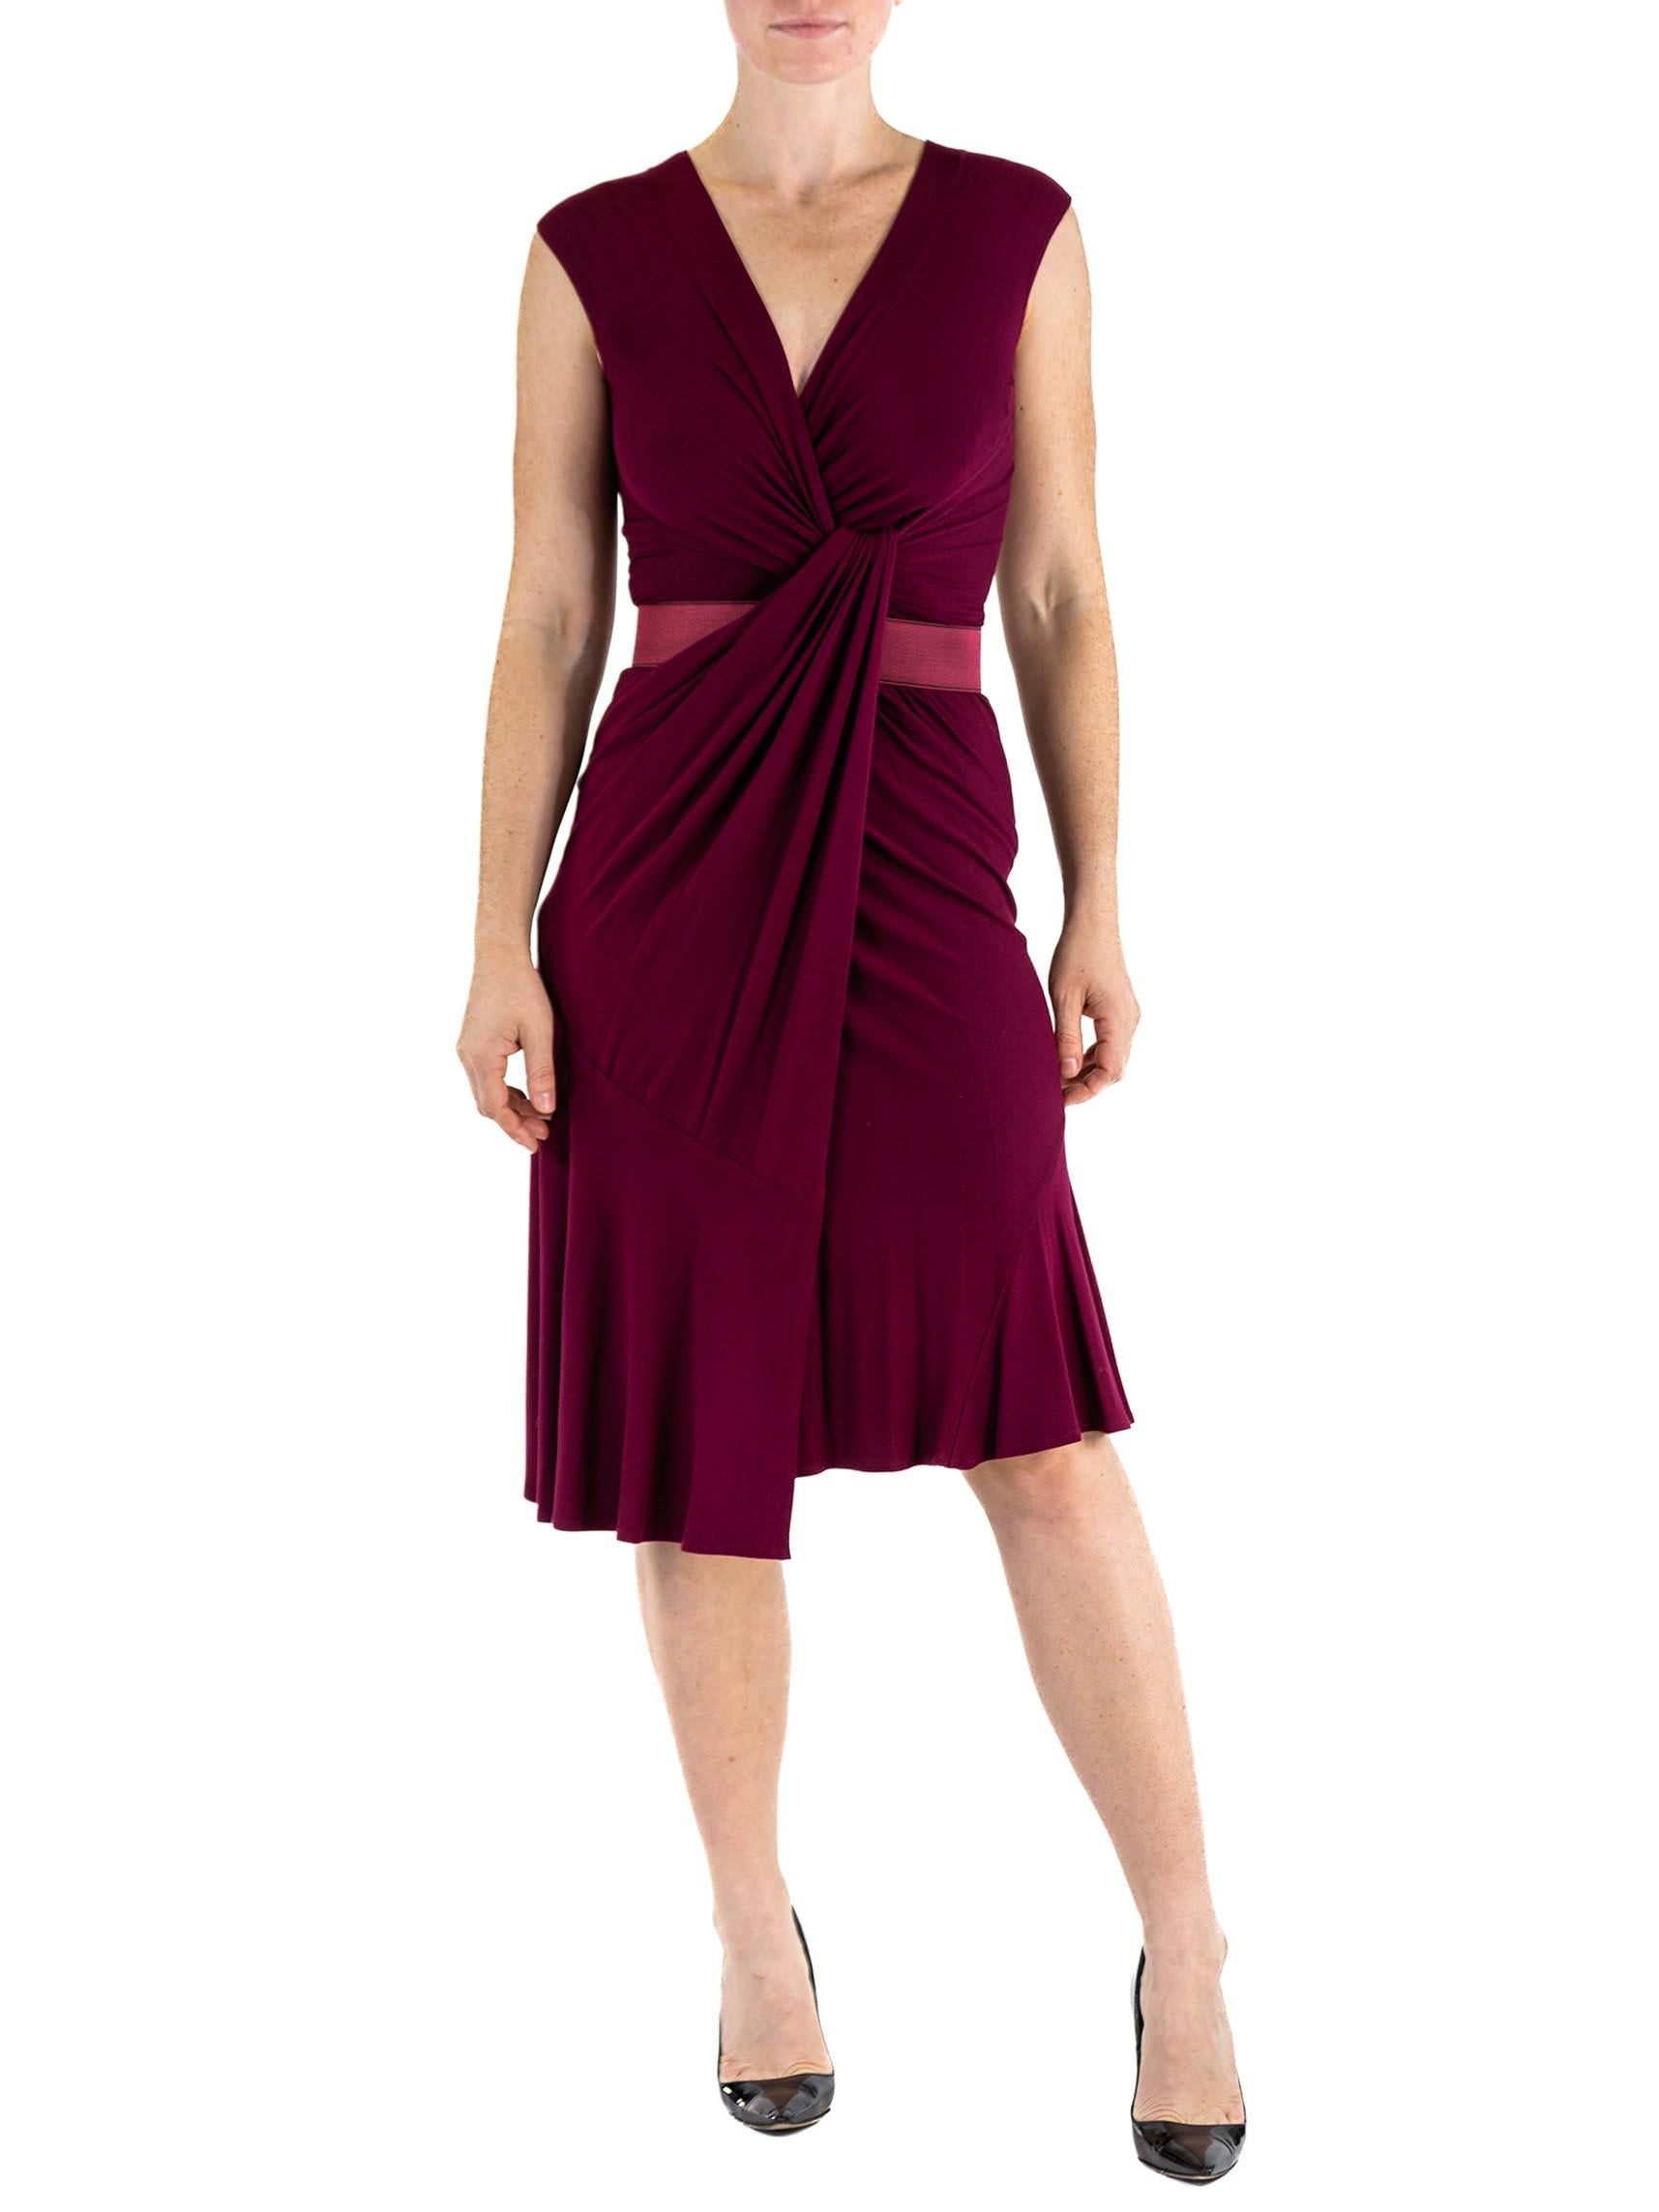 2000S DONNA KARAN Garnet Red Rayon Jersey Knot Front Ruched Dress With Belt For Sale 3